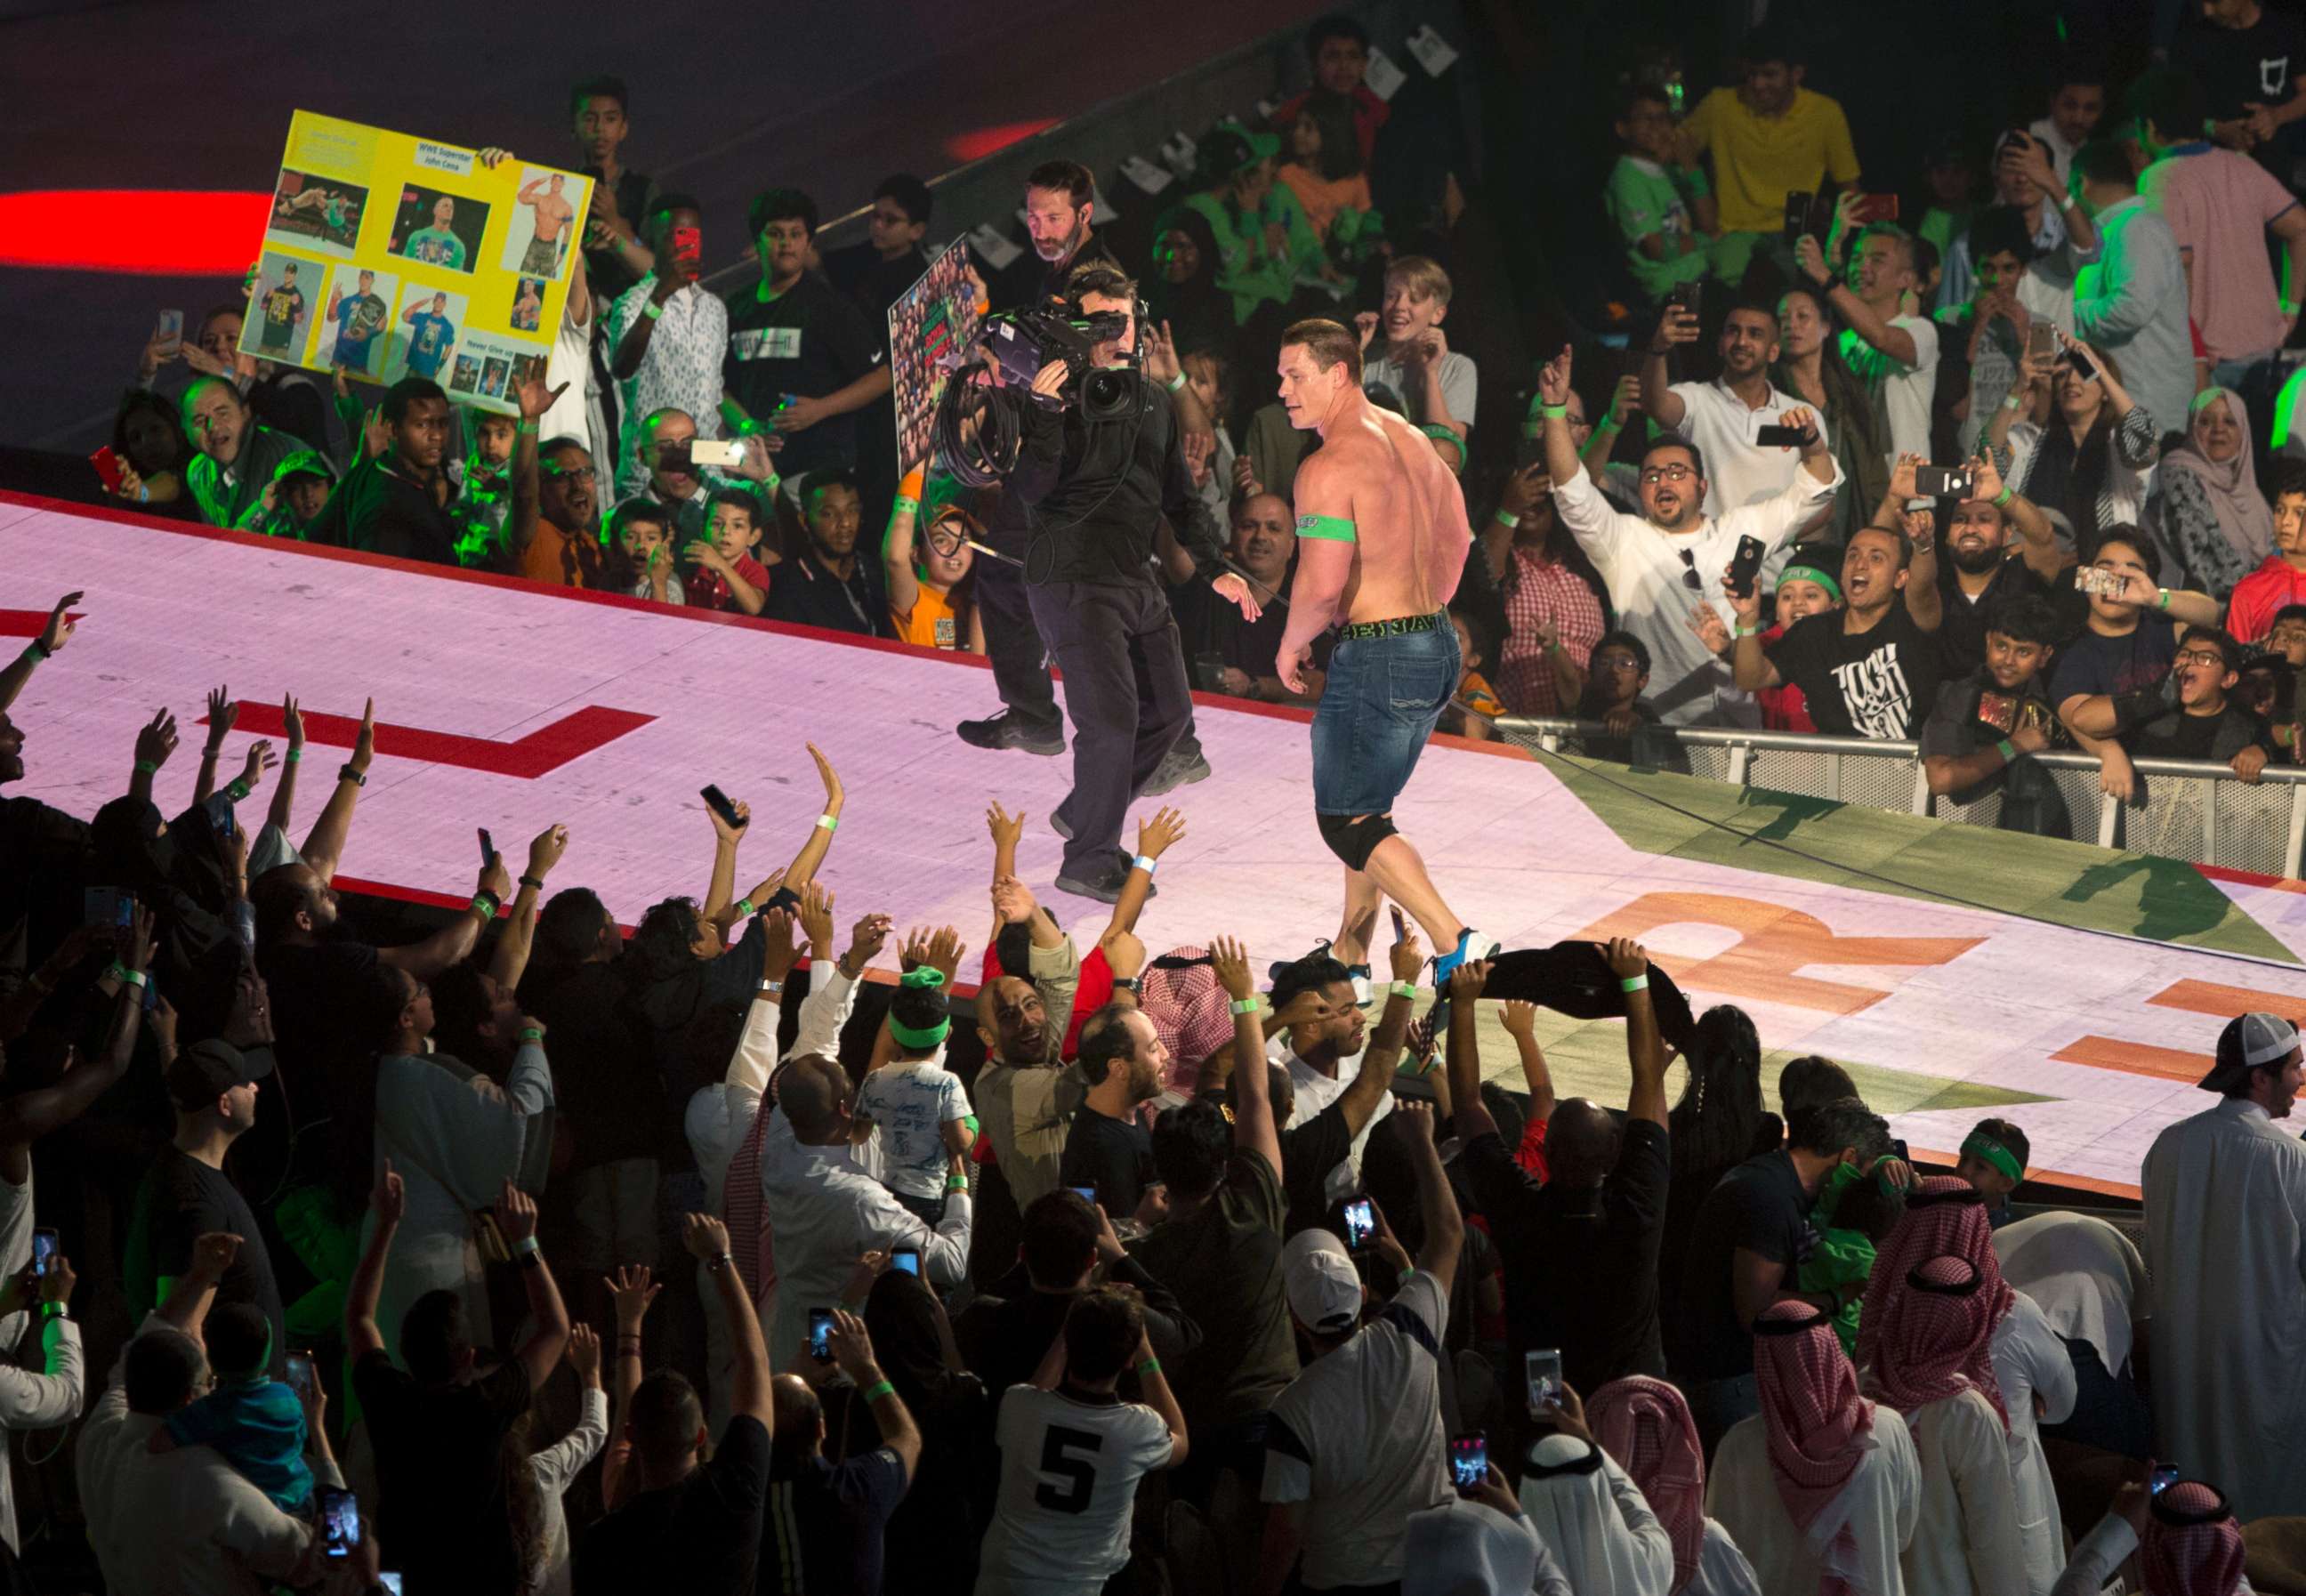 PHOTO: World Wrestling Entertainment star John Cena is greeted by fans during the "Greatest Royal Rumble" event in Jiddah, Saudi Arabia, April 27, 2018.